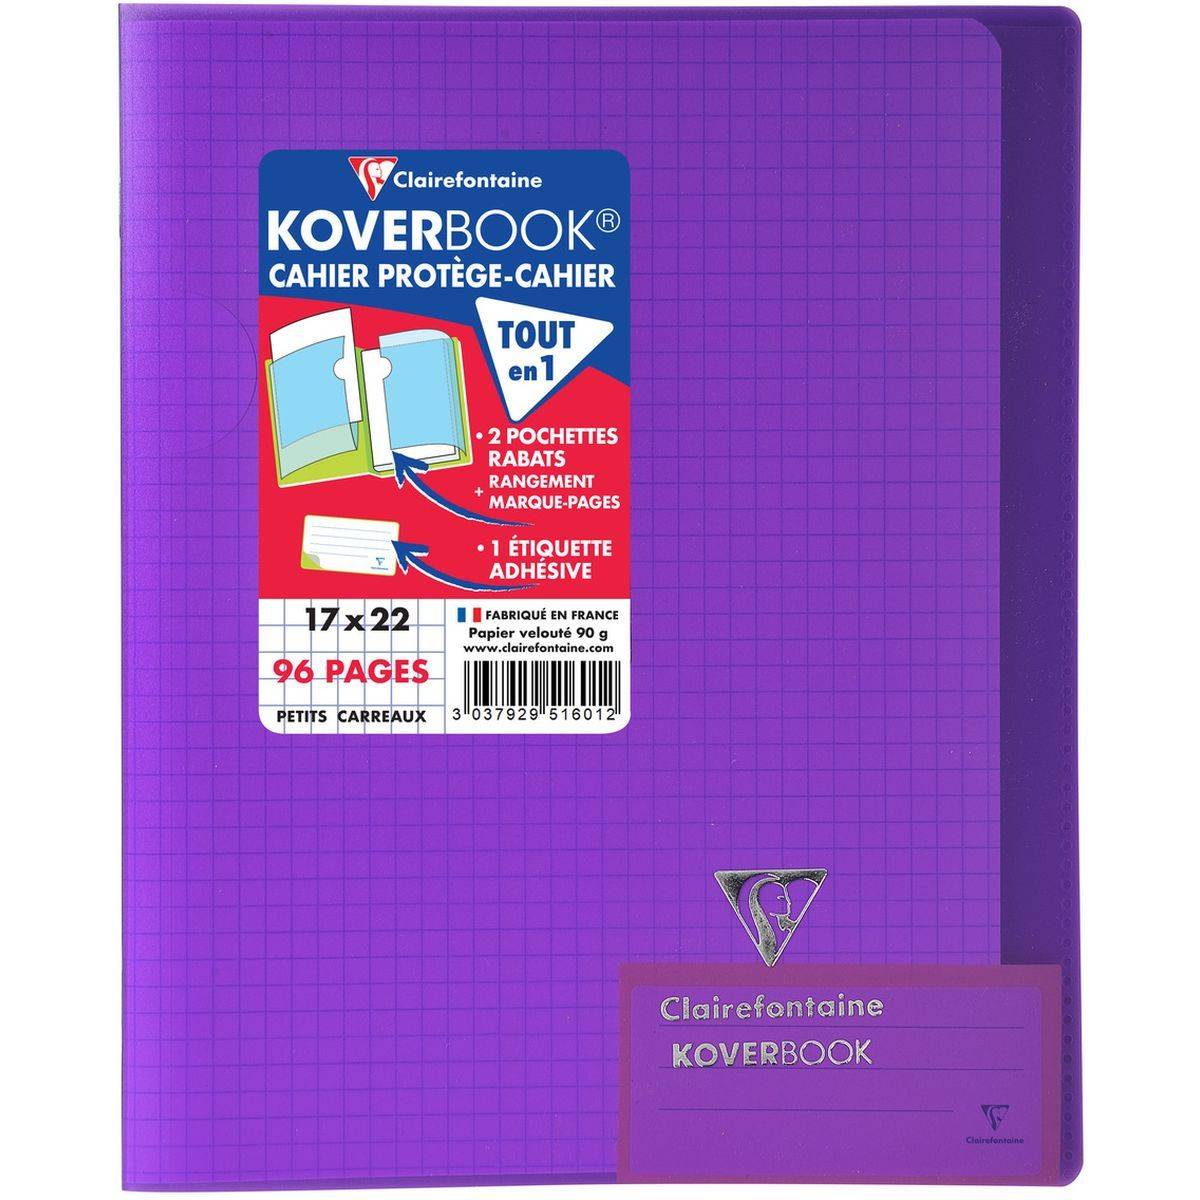 Clairefontaine Koverbook 96 Pages - 17x22 - Small Squares